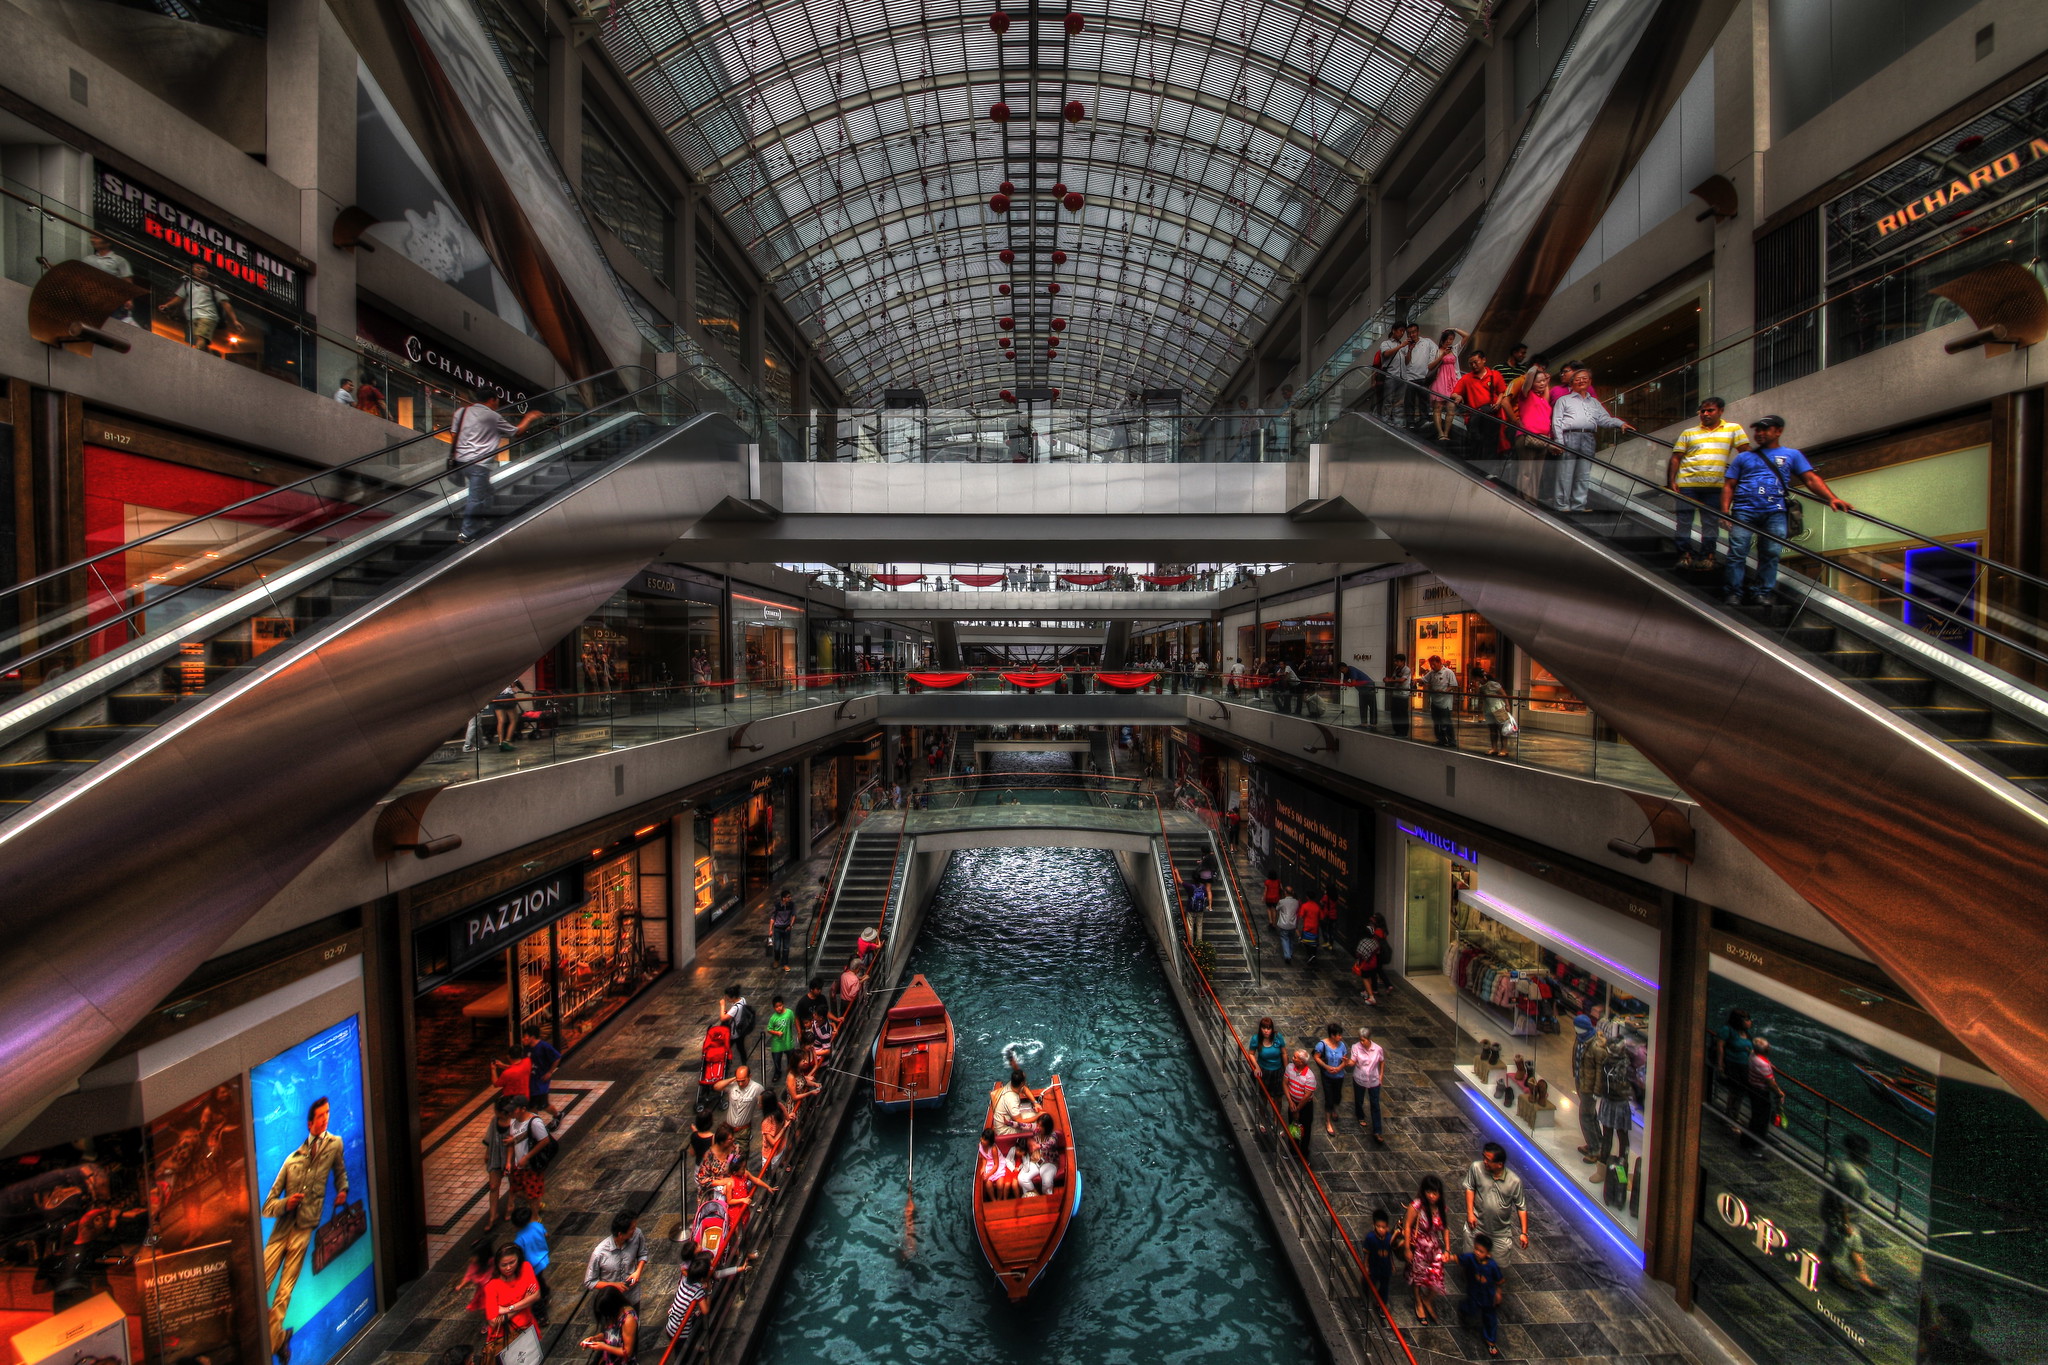 Canals of Commerce - The Shoppes Marina Bay Sands